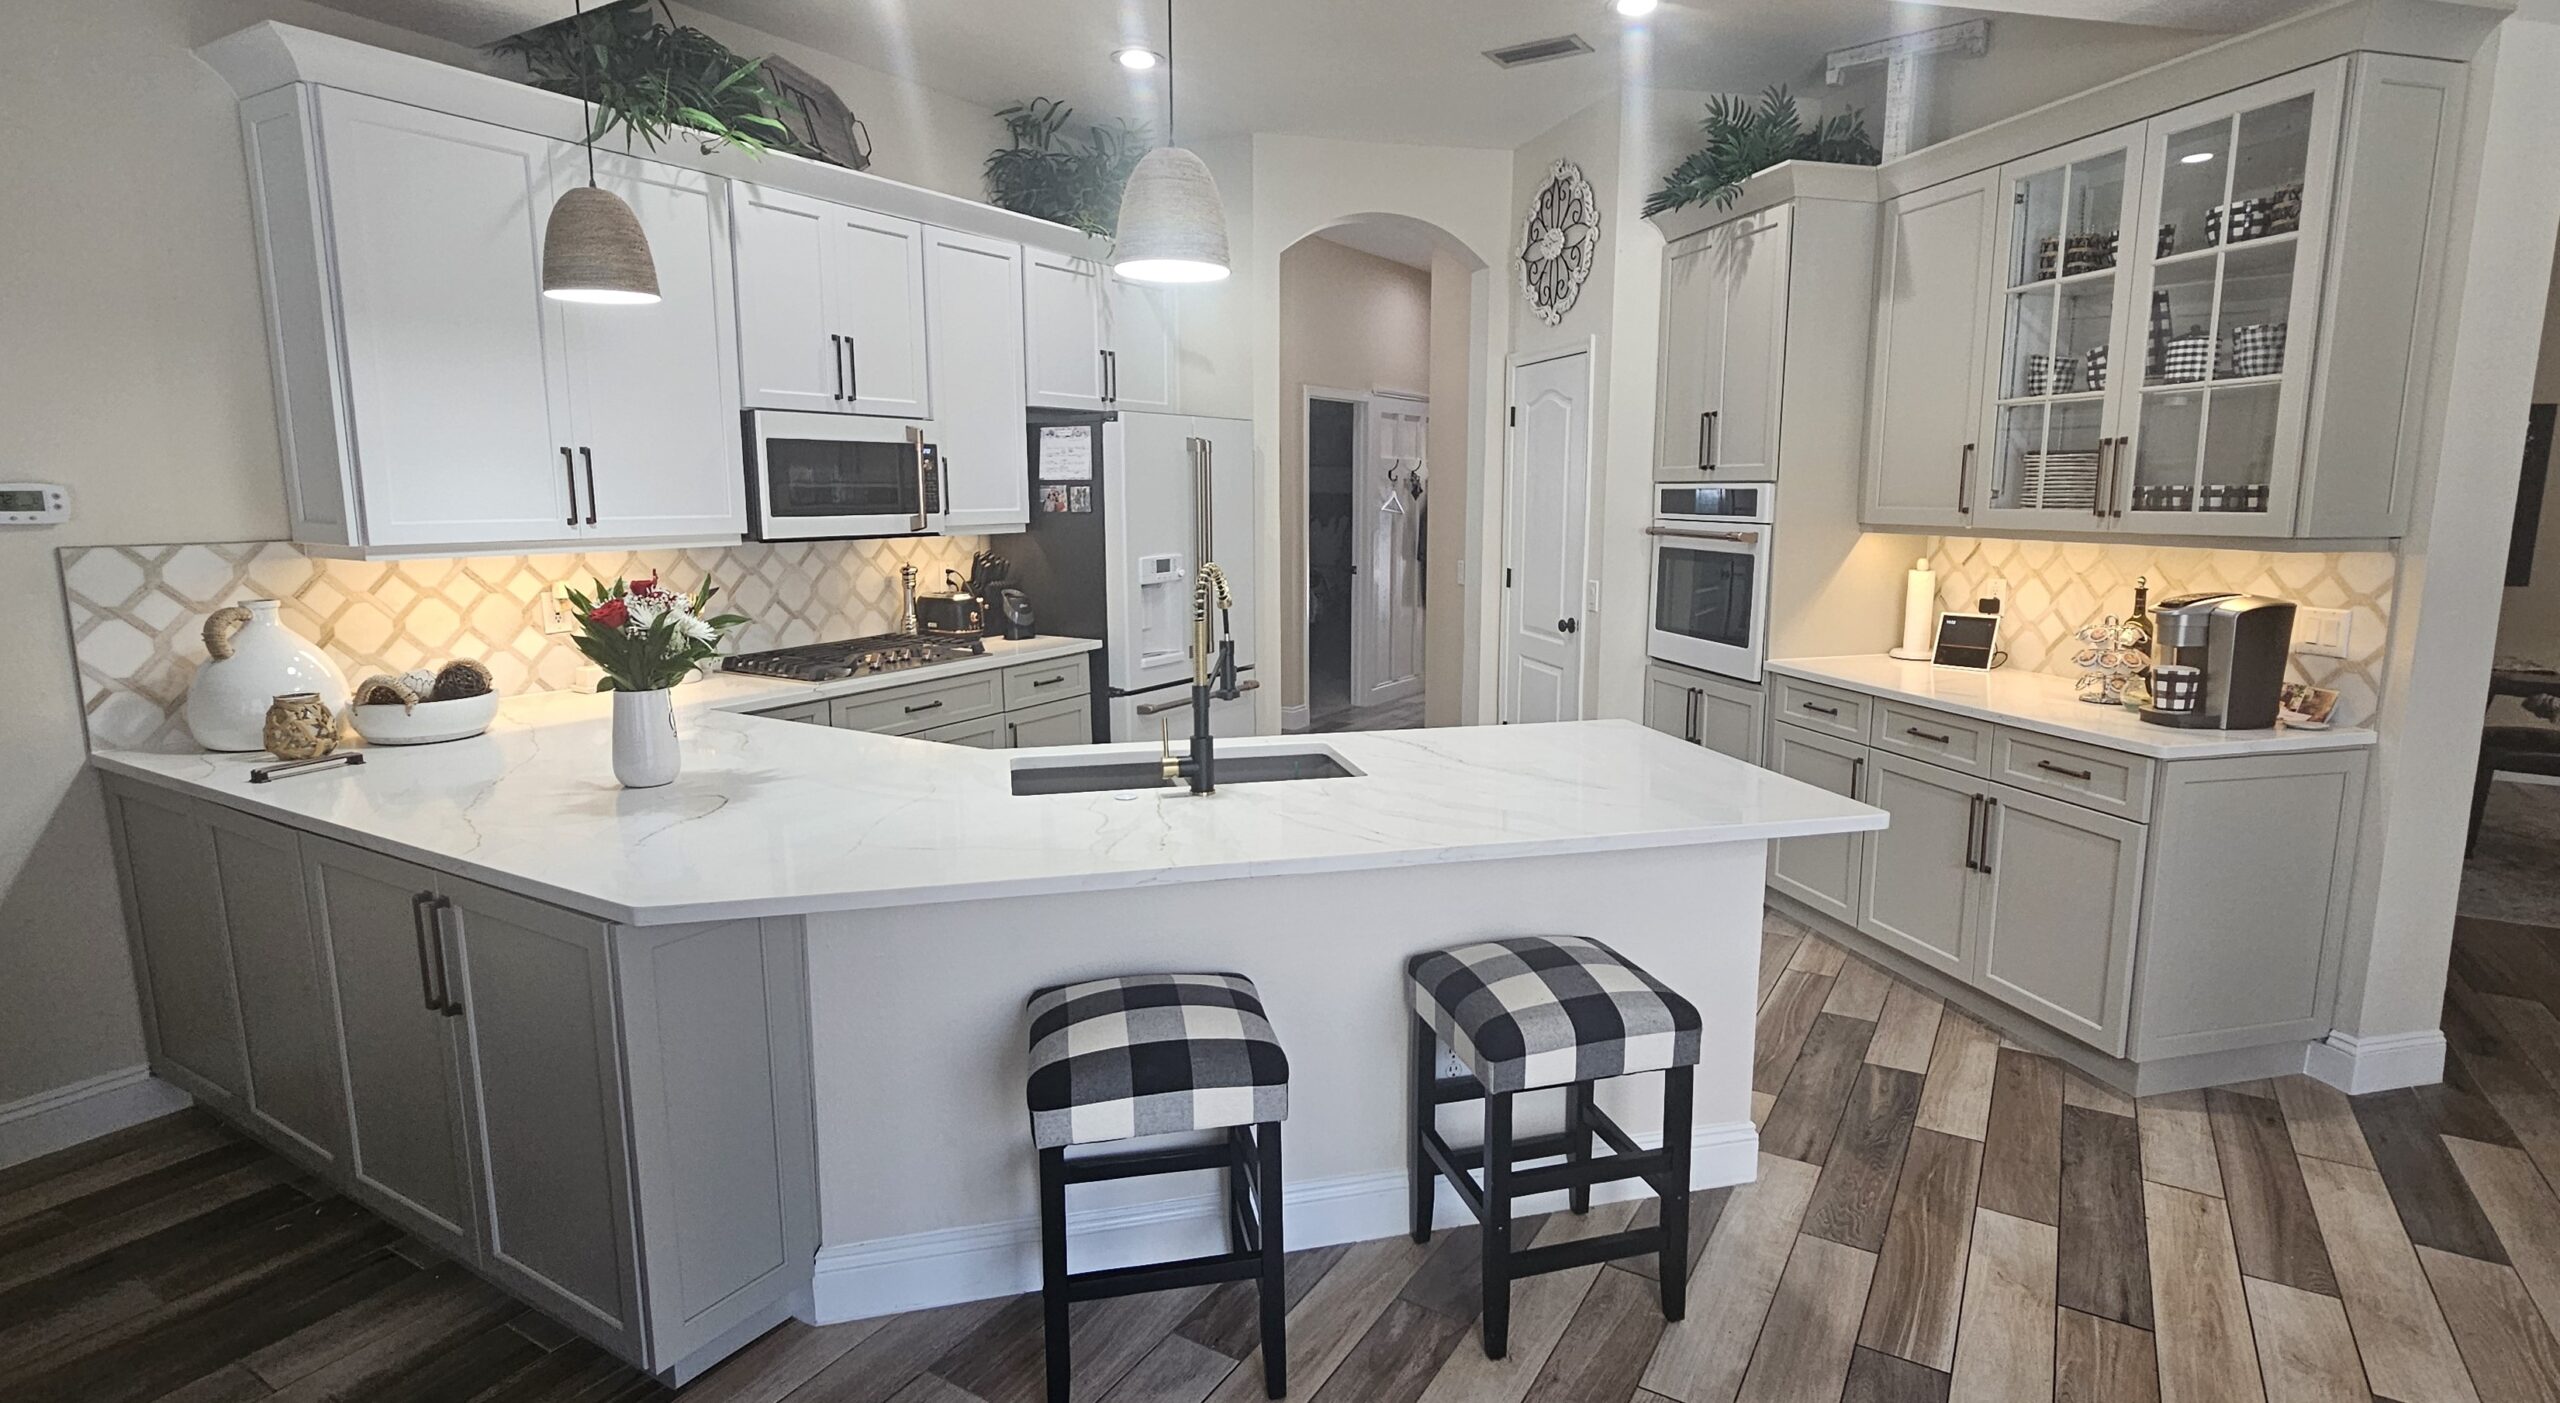 Modern appliances with a high-quality finish, granite worktops, and sleek white cabinet doors in Kenneth City 